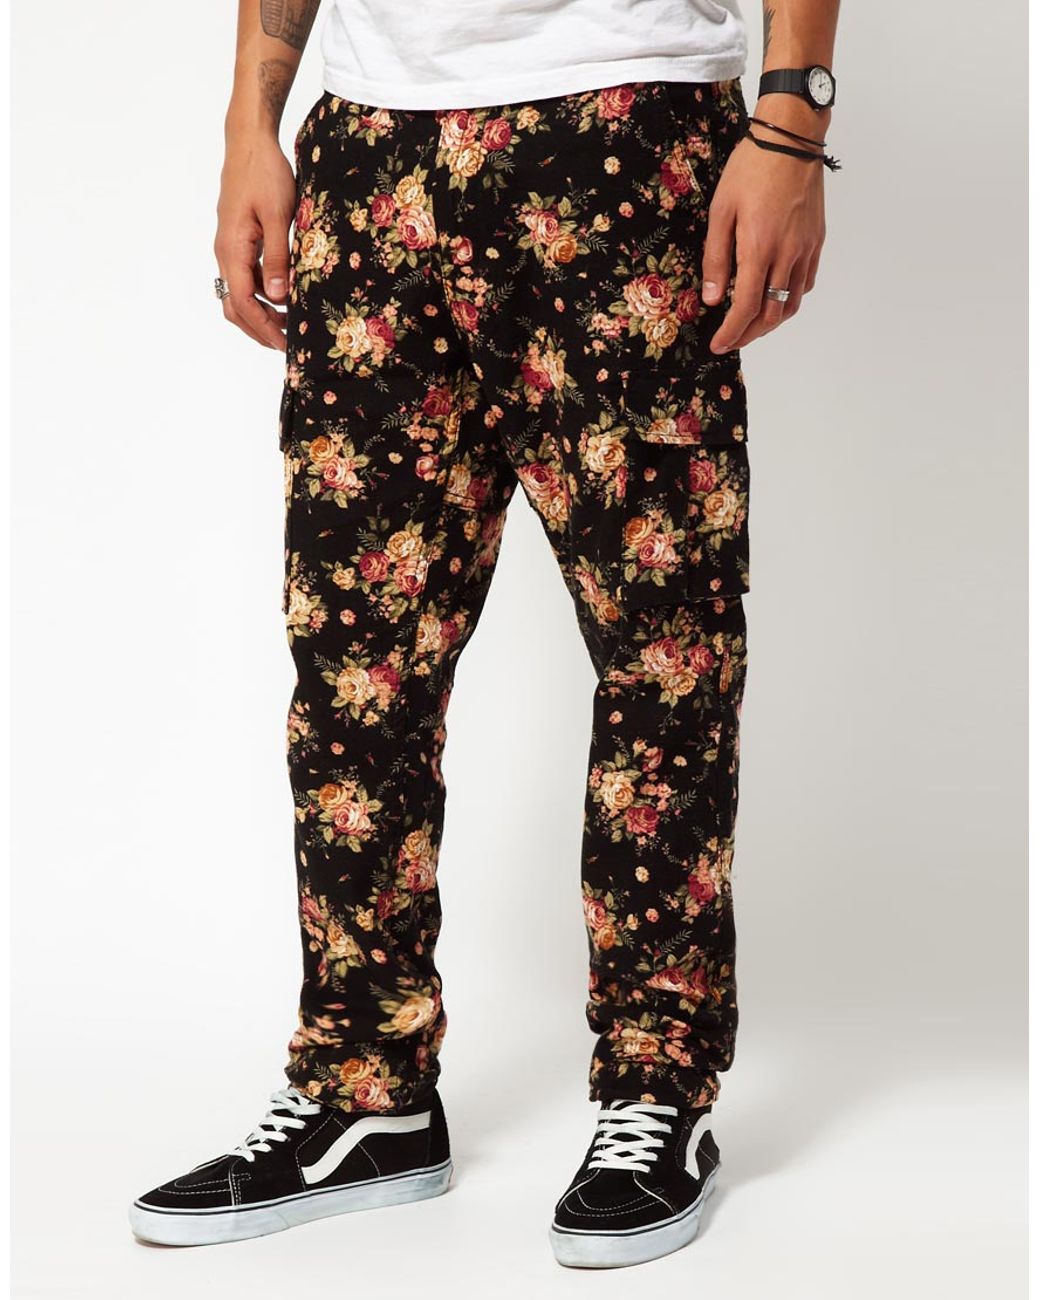 Multi Coloured Mens Printed Trousers